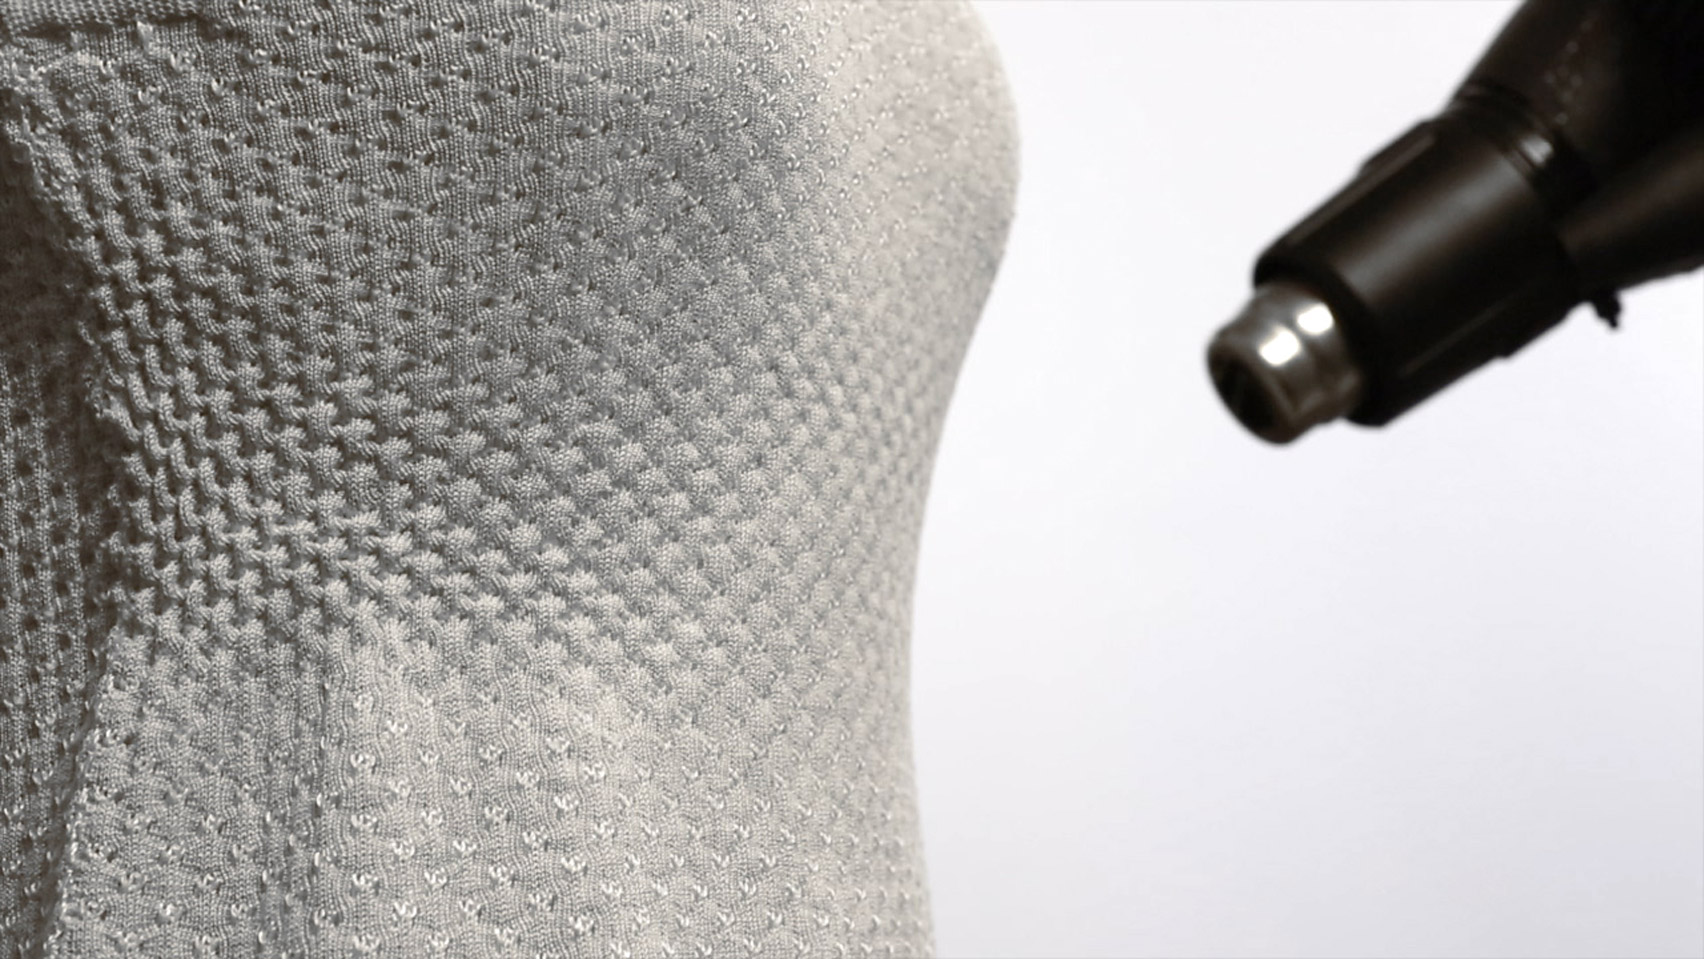 Close-up image of a white knit dress fitted to the bust of a mannequin with a nozzle hovering nearby